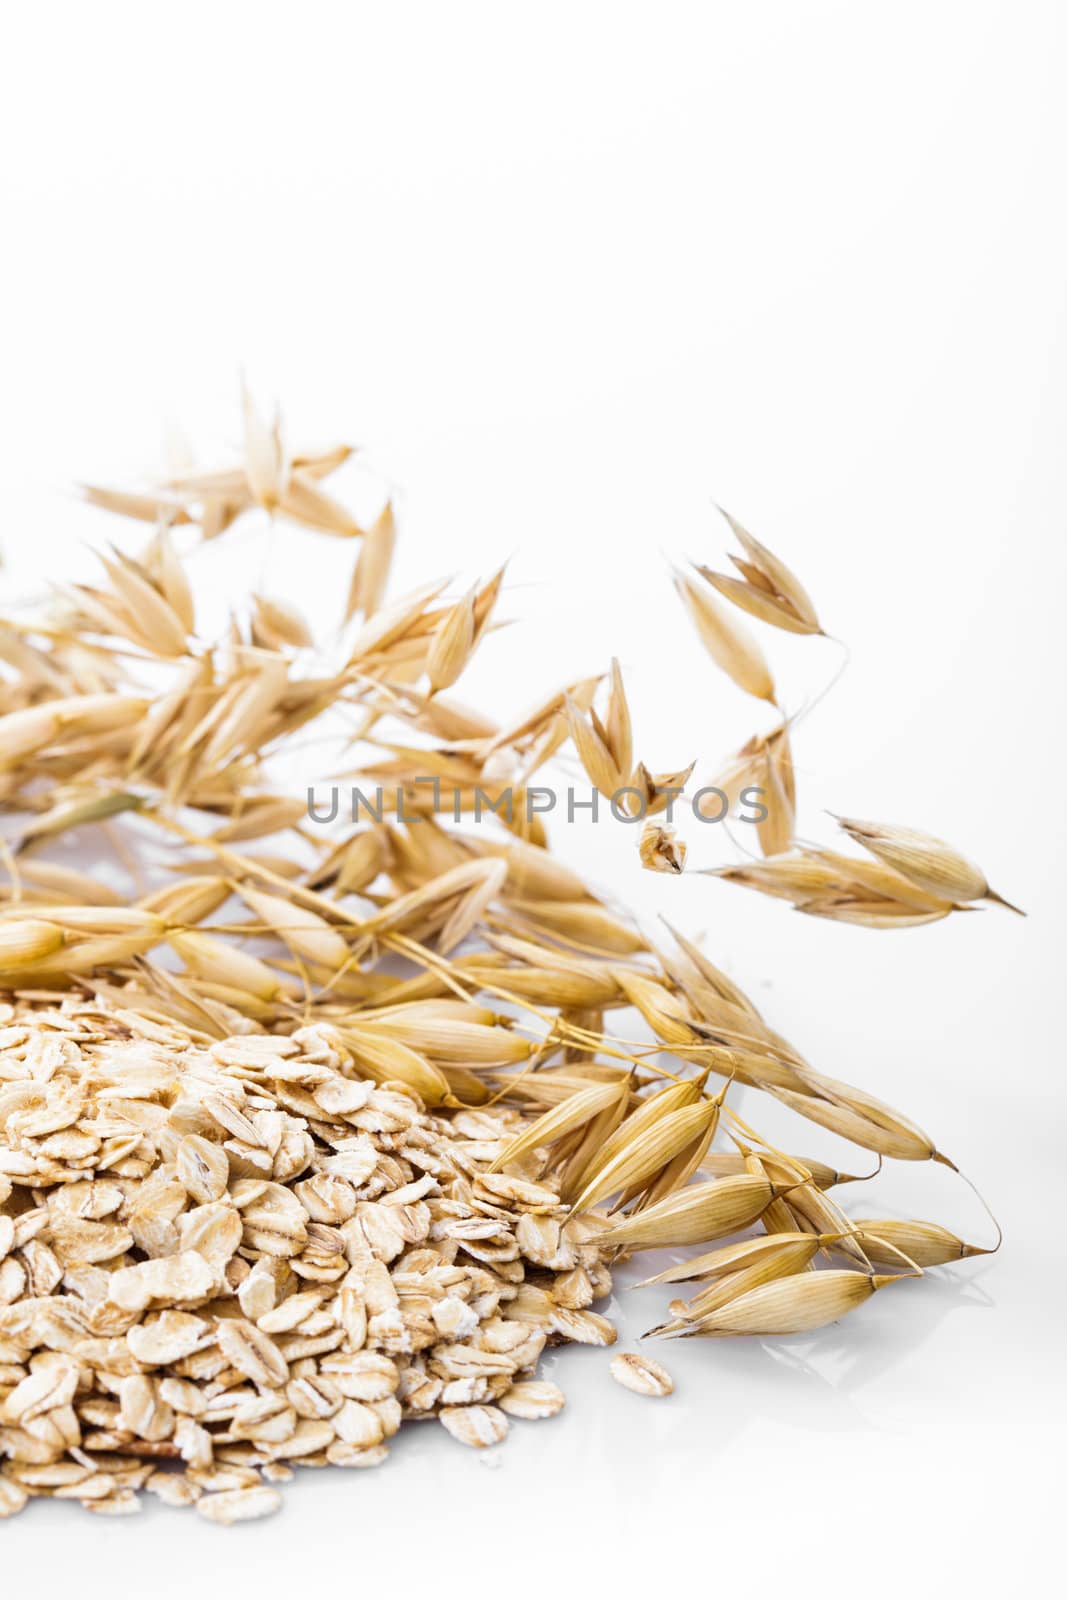 Oat flakes heap isolated on white background